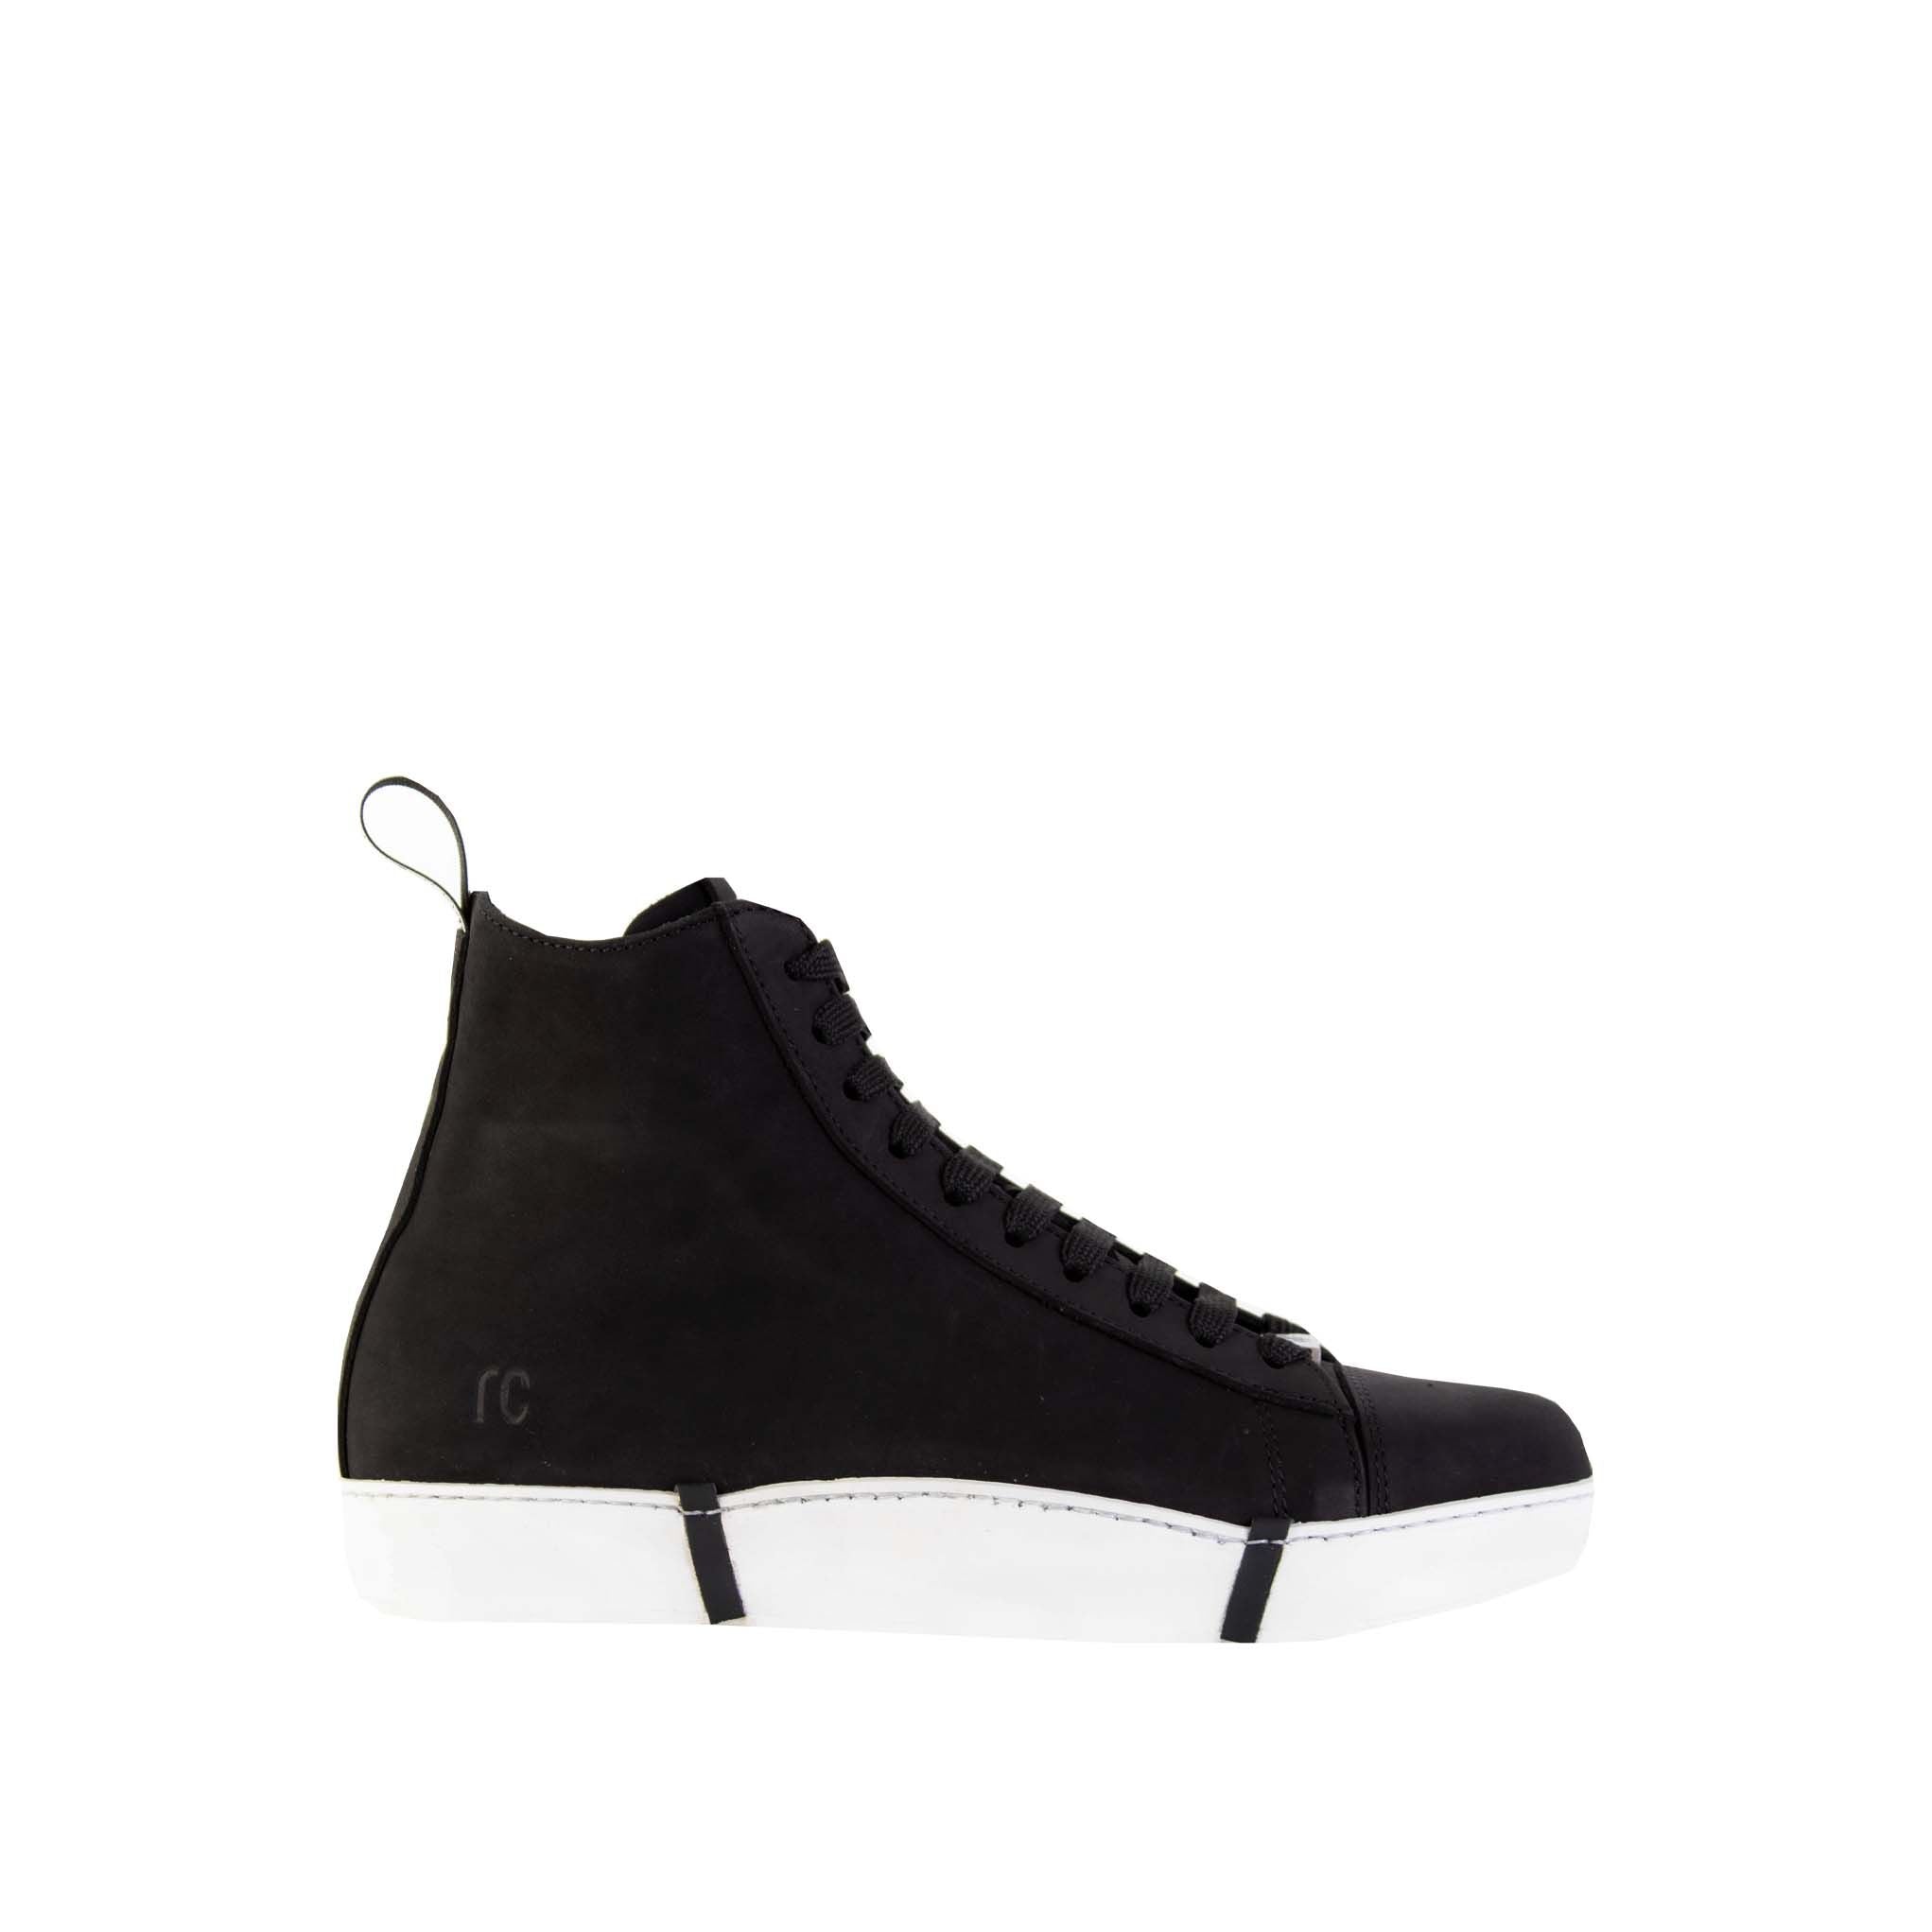 Elevated Chic Suede High Sneakers in Black and White